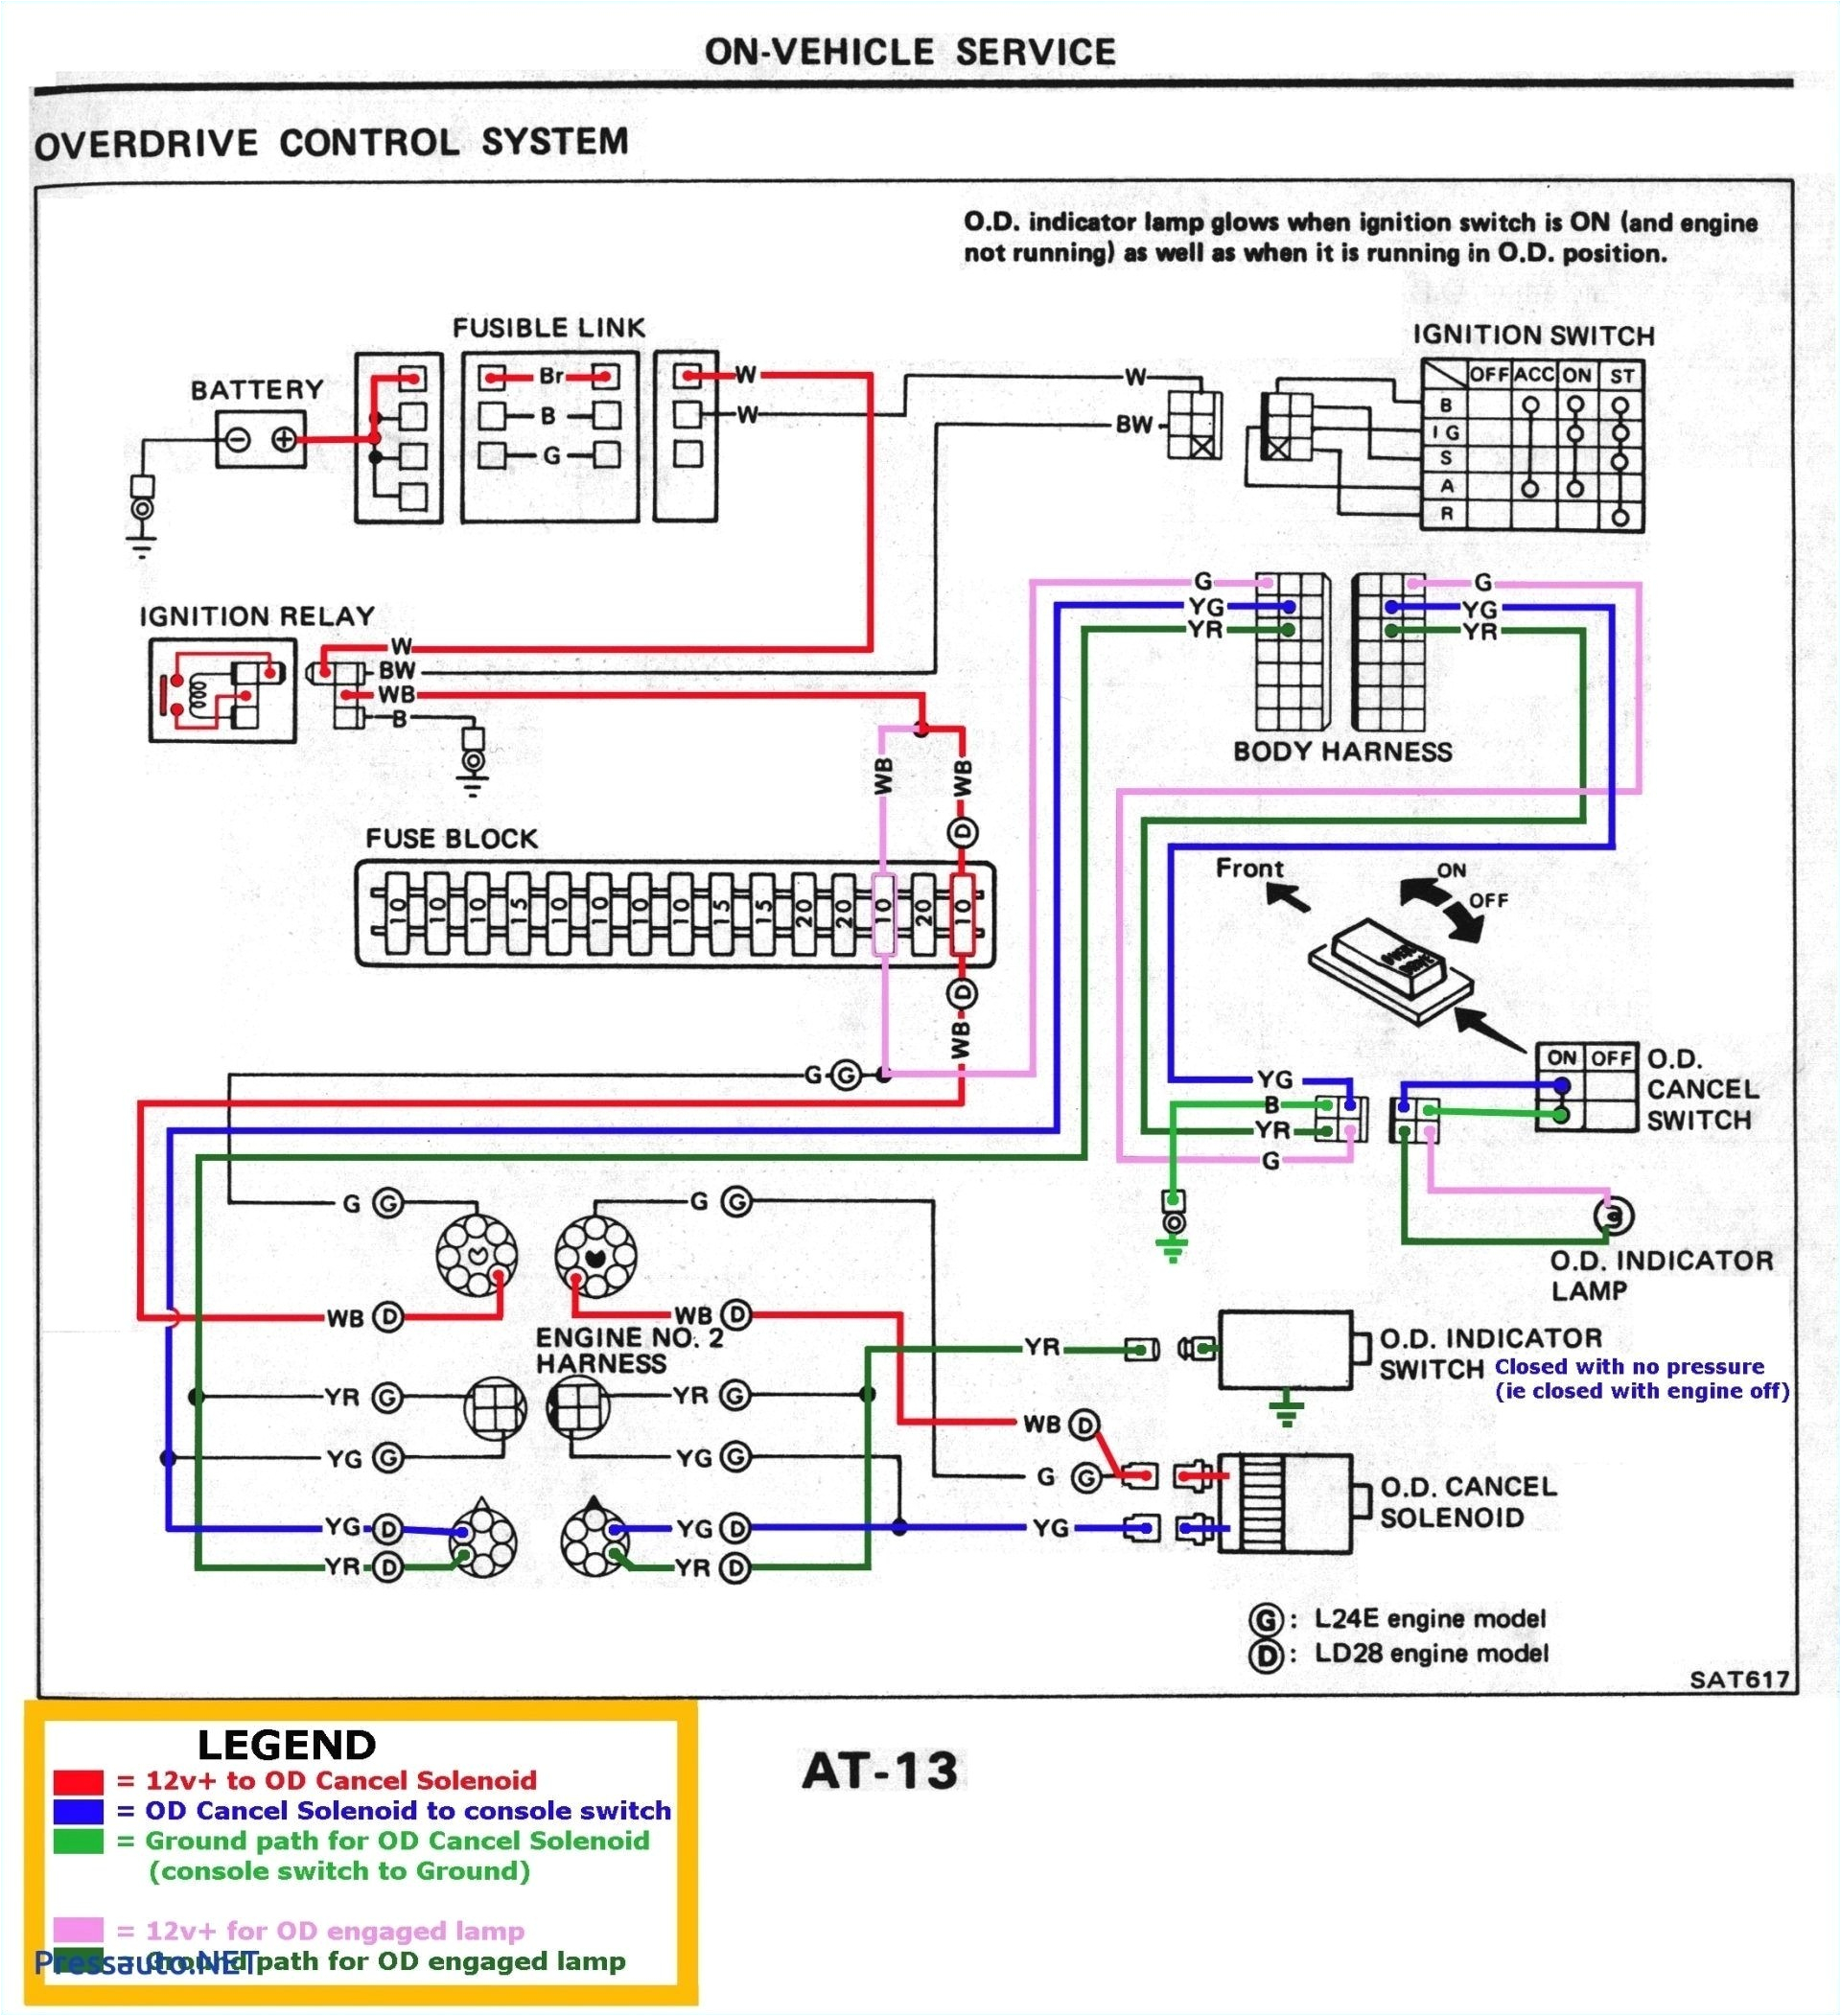 wiring 4 wire o2 sensor furthermore stepper motor driver wiring on 4 mix 4 wire diagram